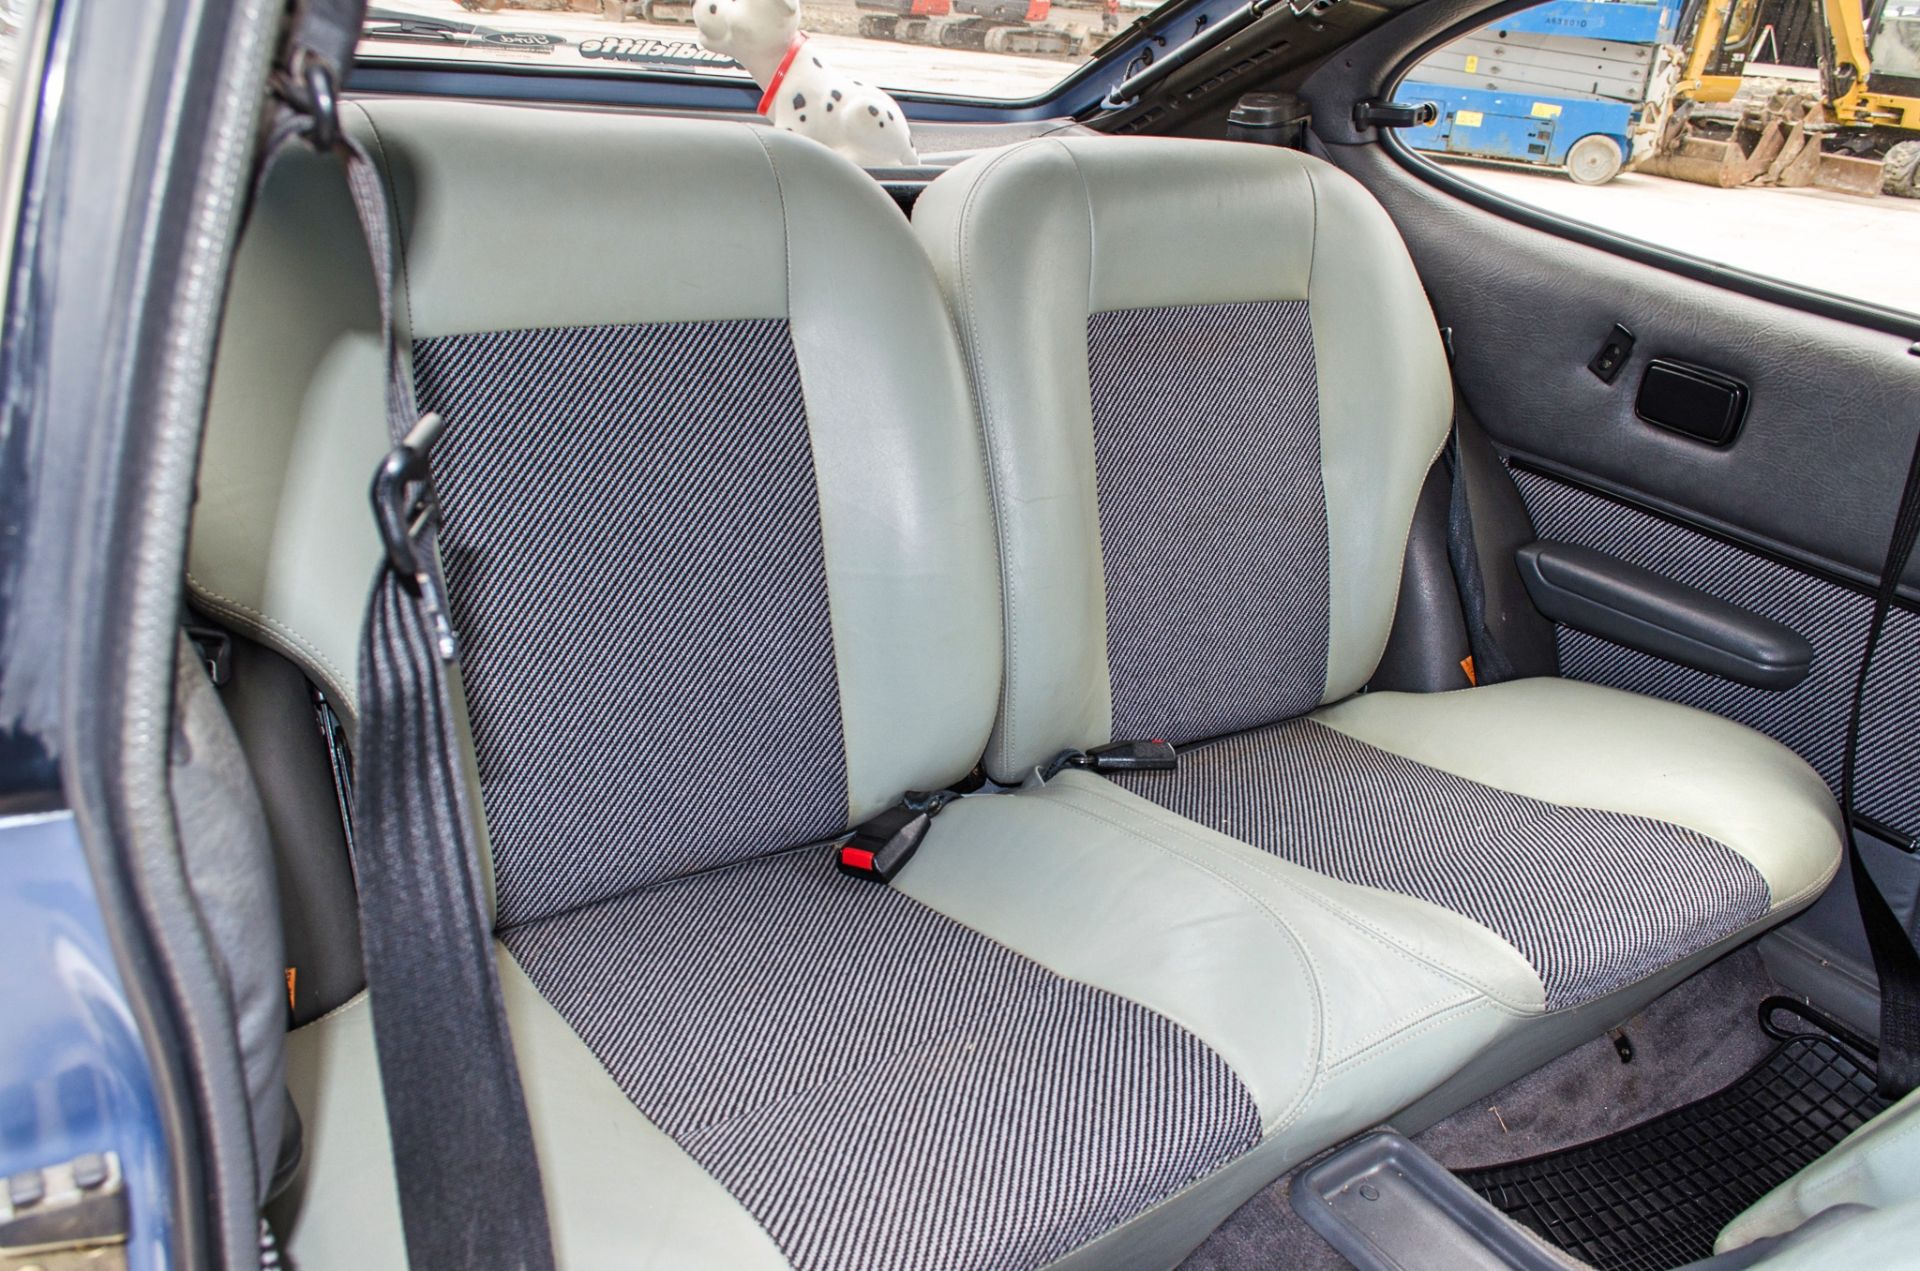 1986 Ford Capri 2.8 Injection Special 3 door coupe - Image 38 of 56